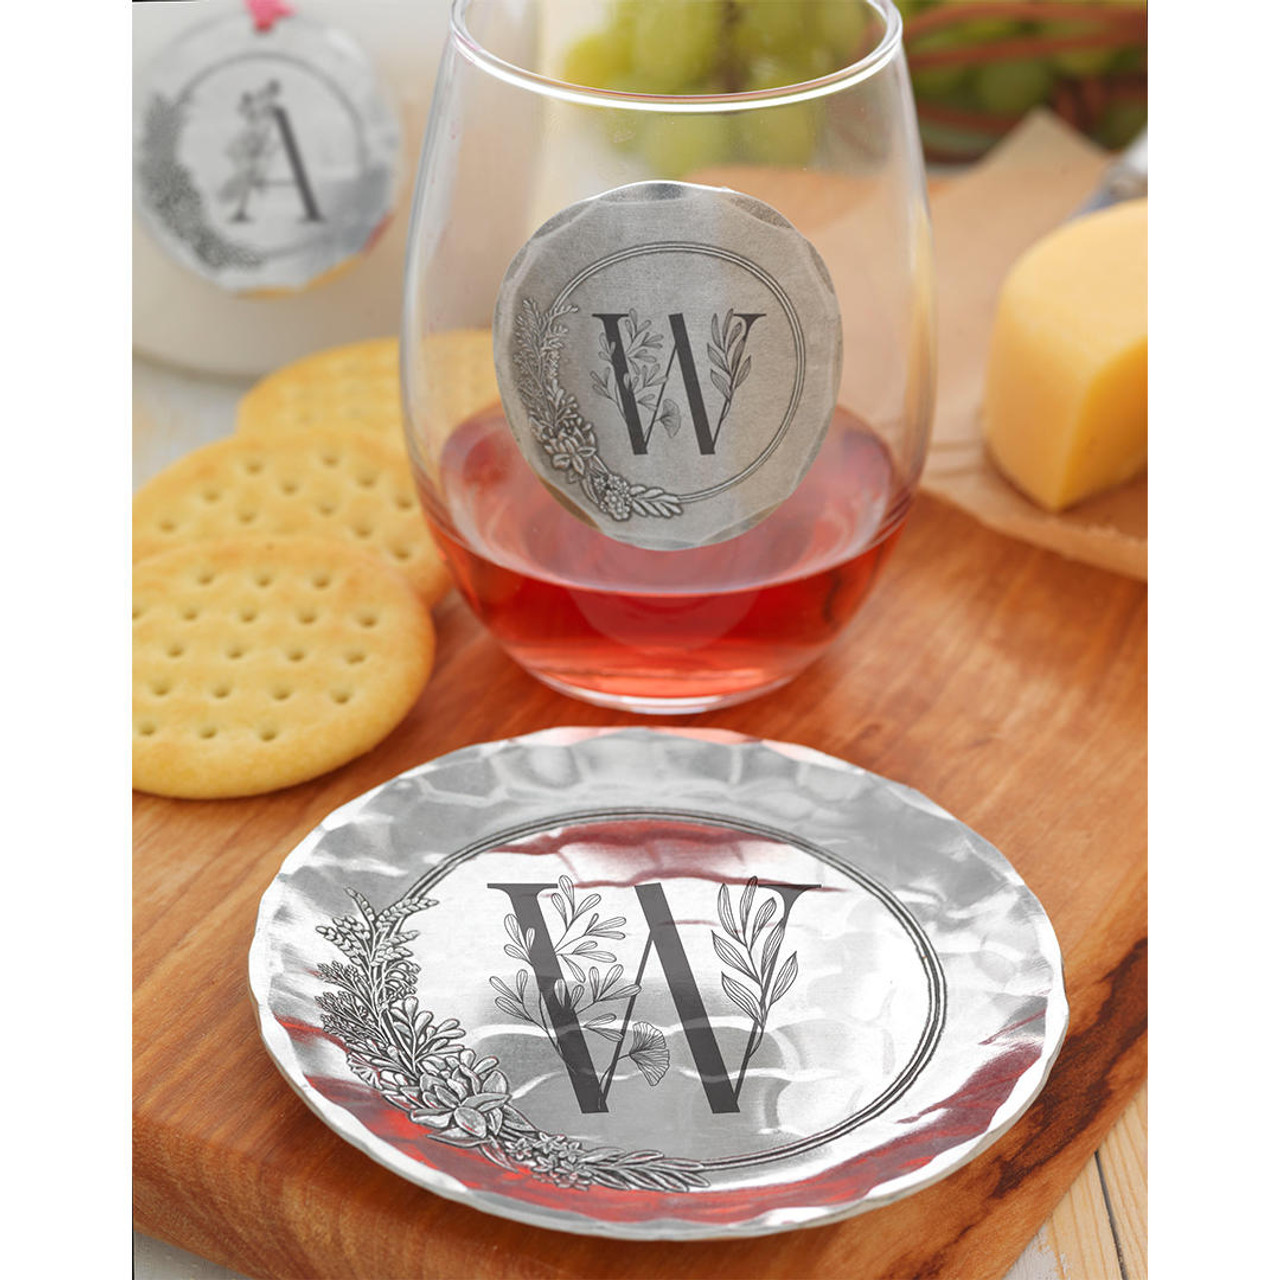 https://cdn11.bigcommerce.com/s-ekmdhvvdto/images/stencil/1280x1280/products/7802/21257/floral-monogram-initial-wine-glass-wendell-august__88652.1632509450.jpg?c=2